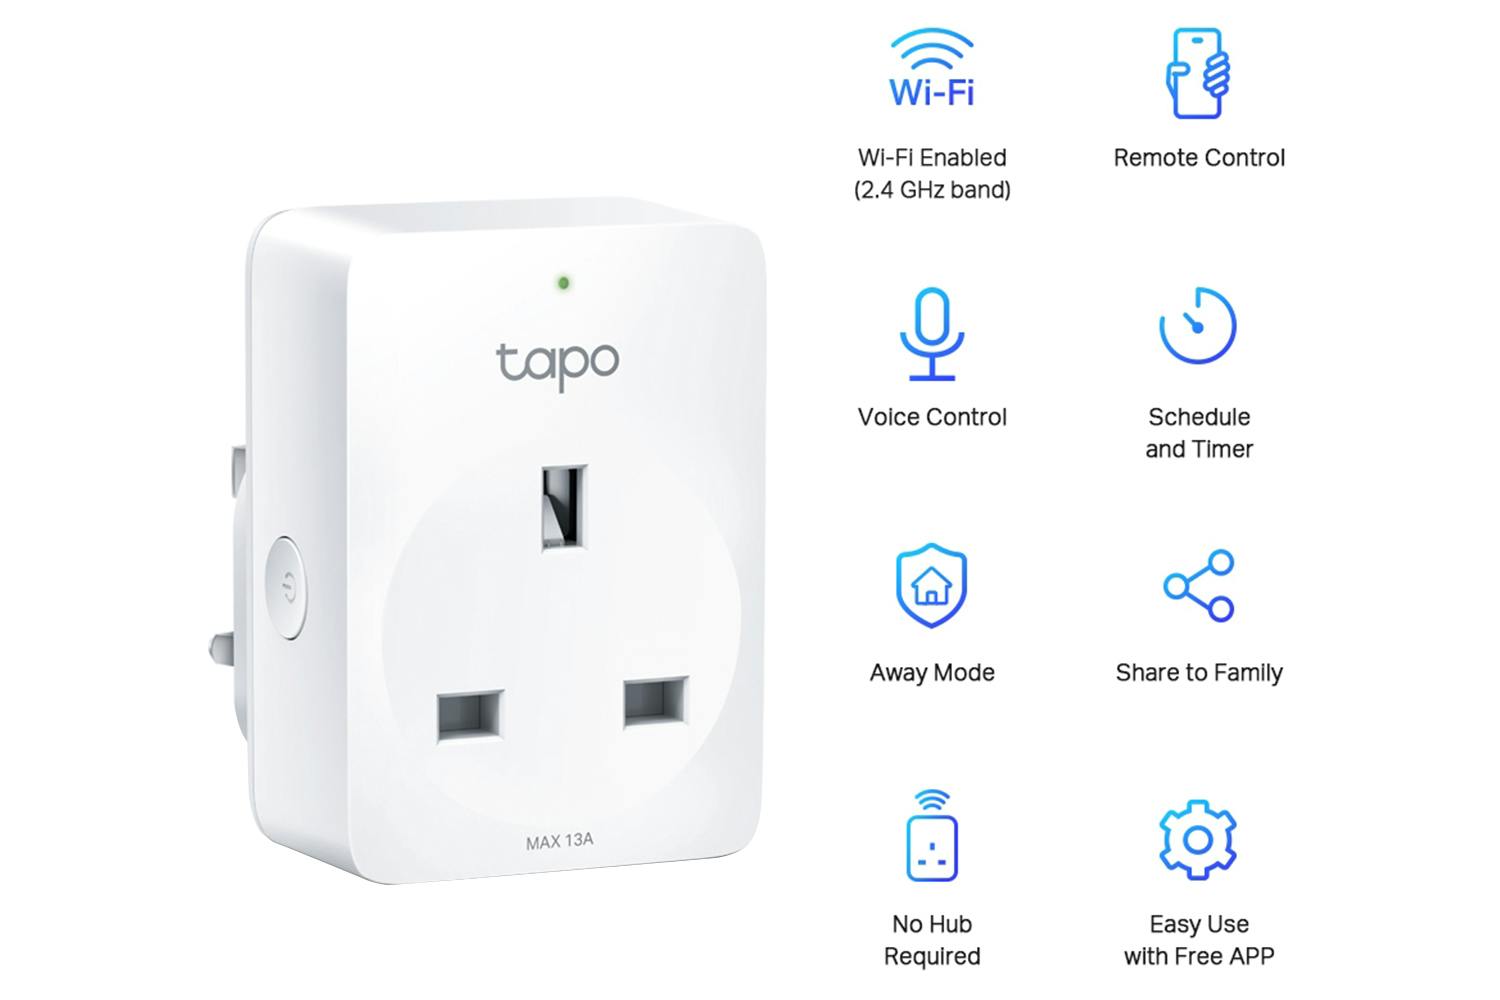 TP-Link Tapo Smart Plug Mini, Smart Home Wifi Outlet Works with Alexa Echo  & Google Home, No Hub Required, Remote Control Your Home Appliances from  Anywhere, New Tapo APP Needed P100 